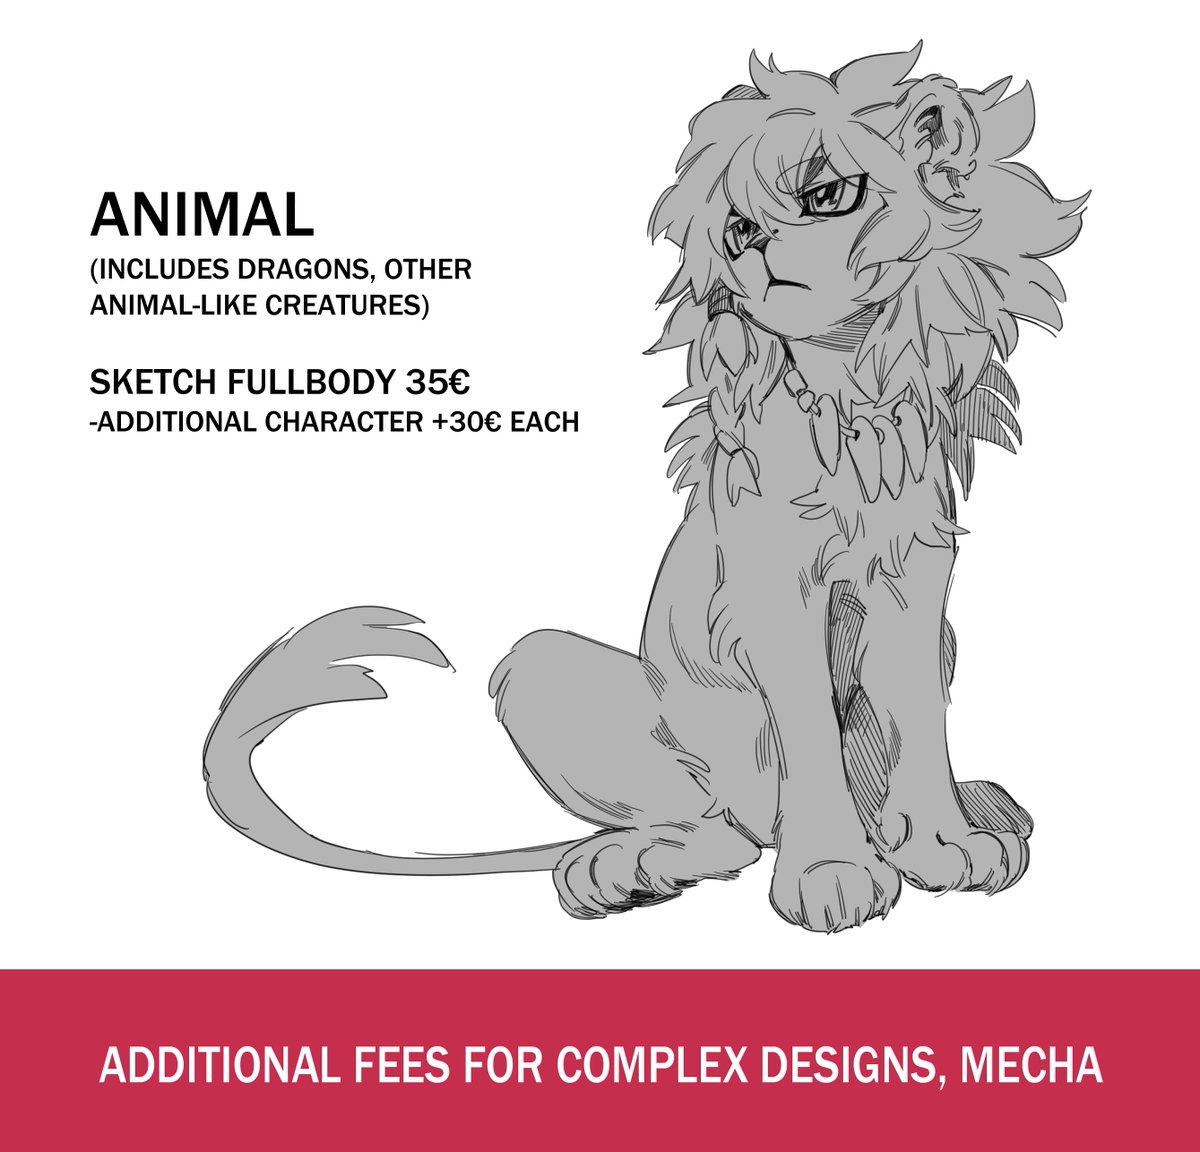 ❗️COMMISSIONS OPEN❗️
Only doing animal commissions this time 